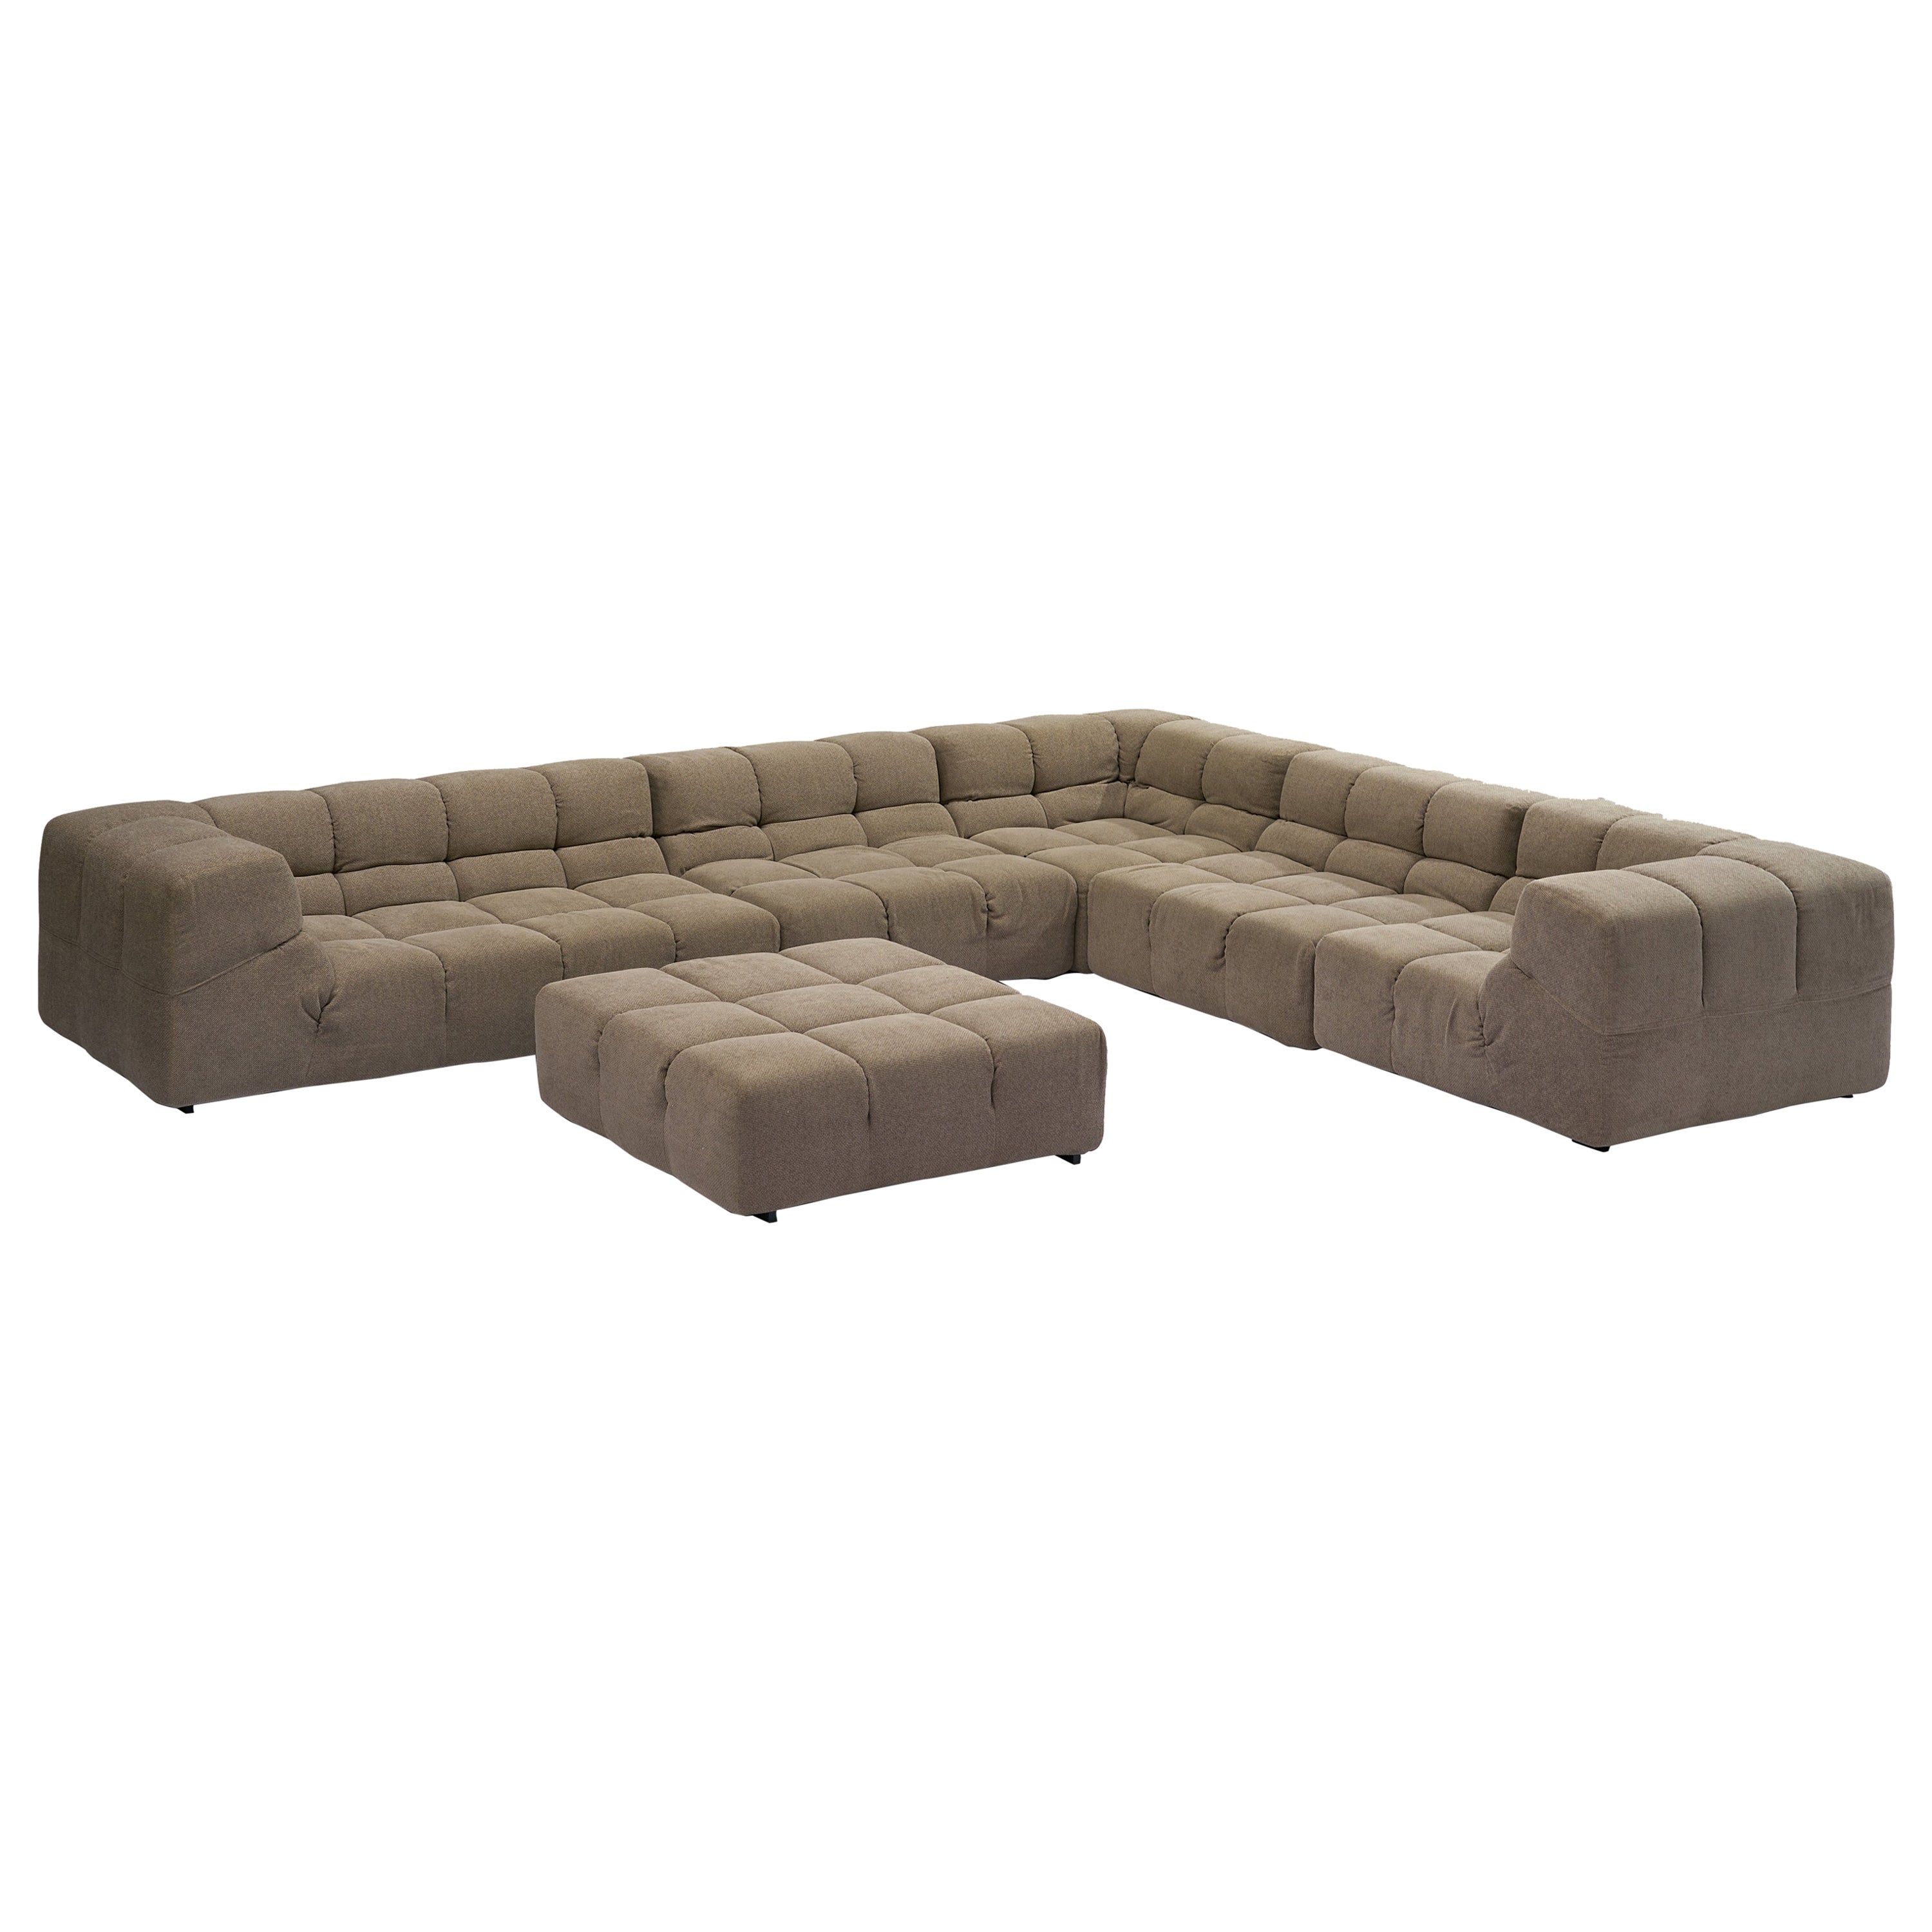 B&B Italia Tufty Time sectional sofa designed by Patricia Urquiola For Sale